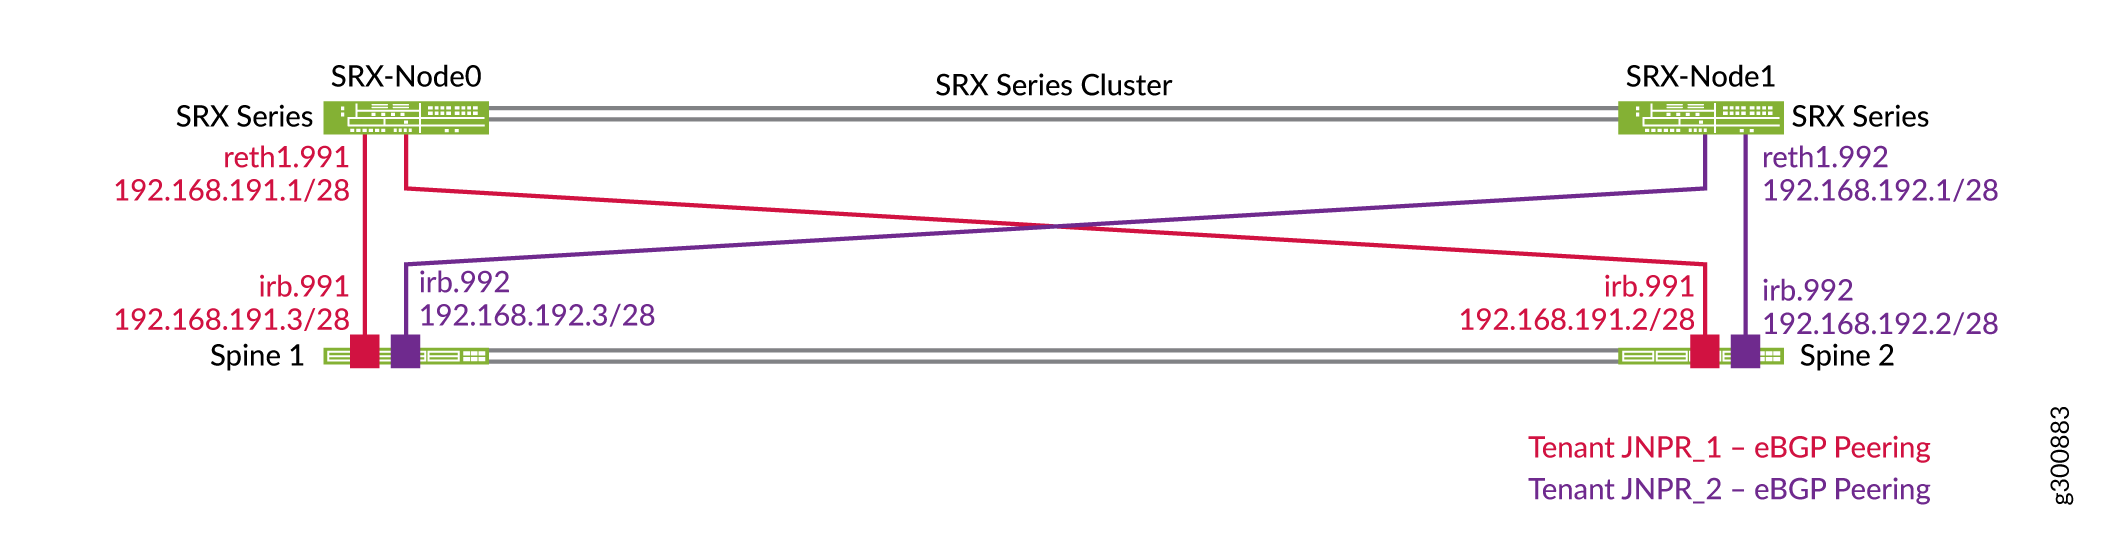 Topology of SRX Cluster with EBGP Peering